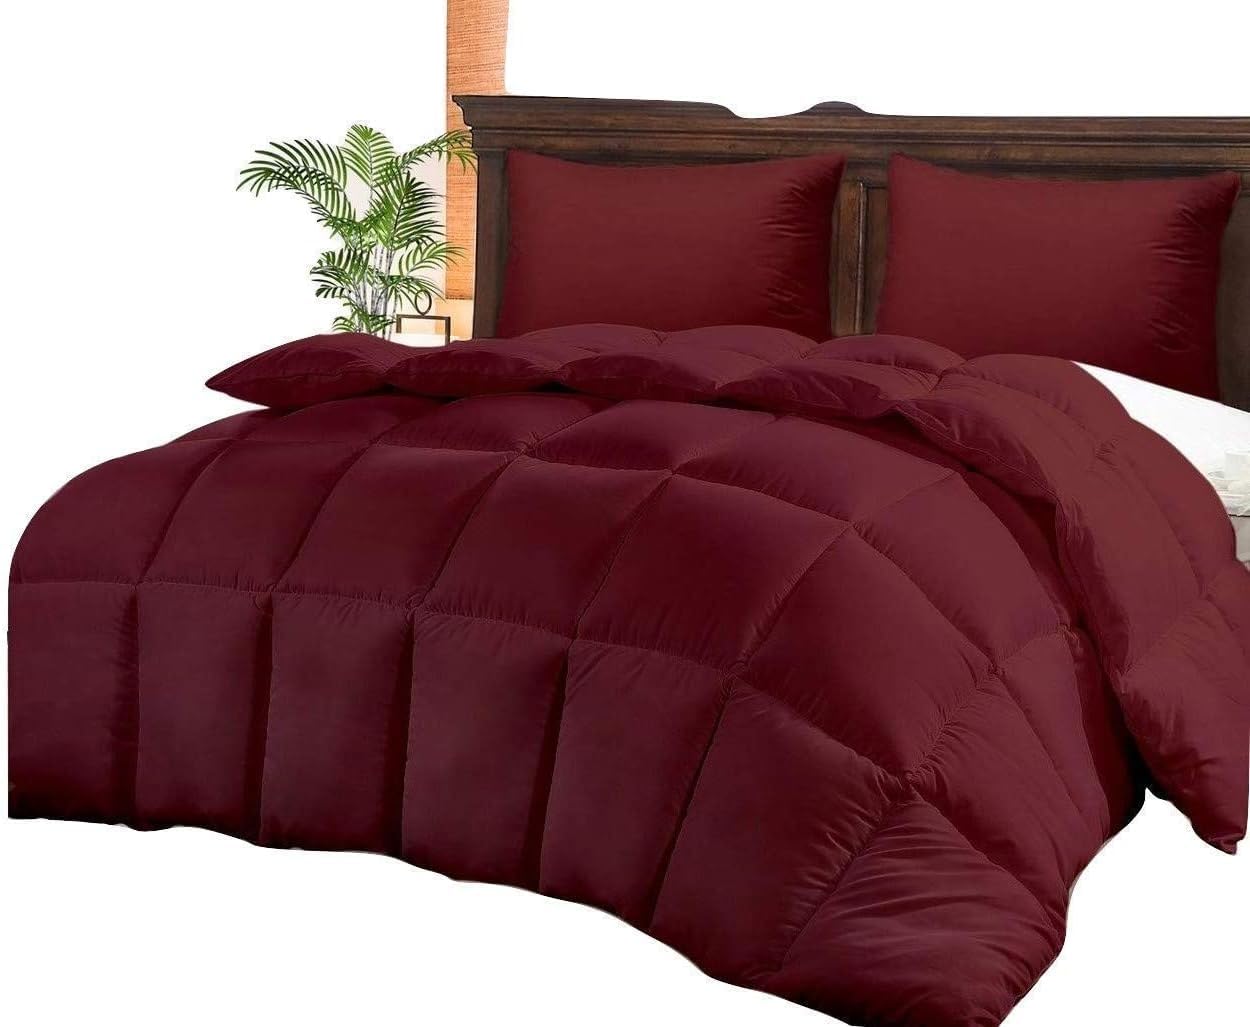 Comforter Cover King Size Egyptian Cotton 1PC Burgundy